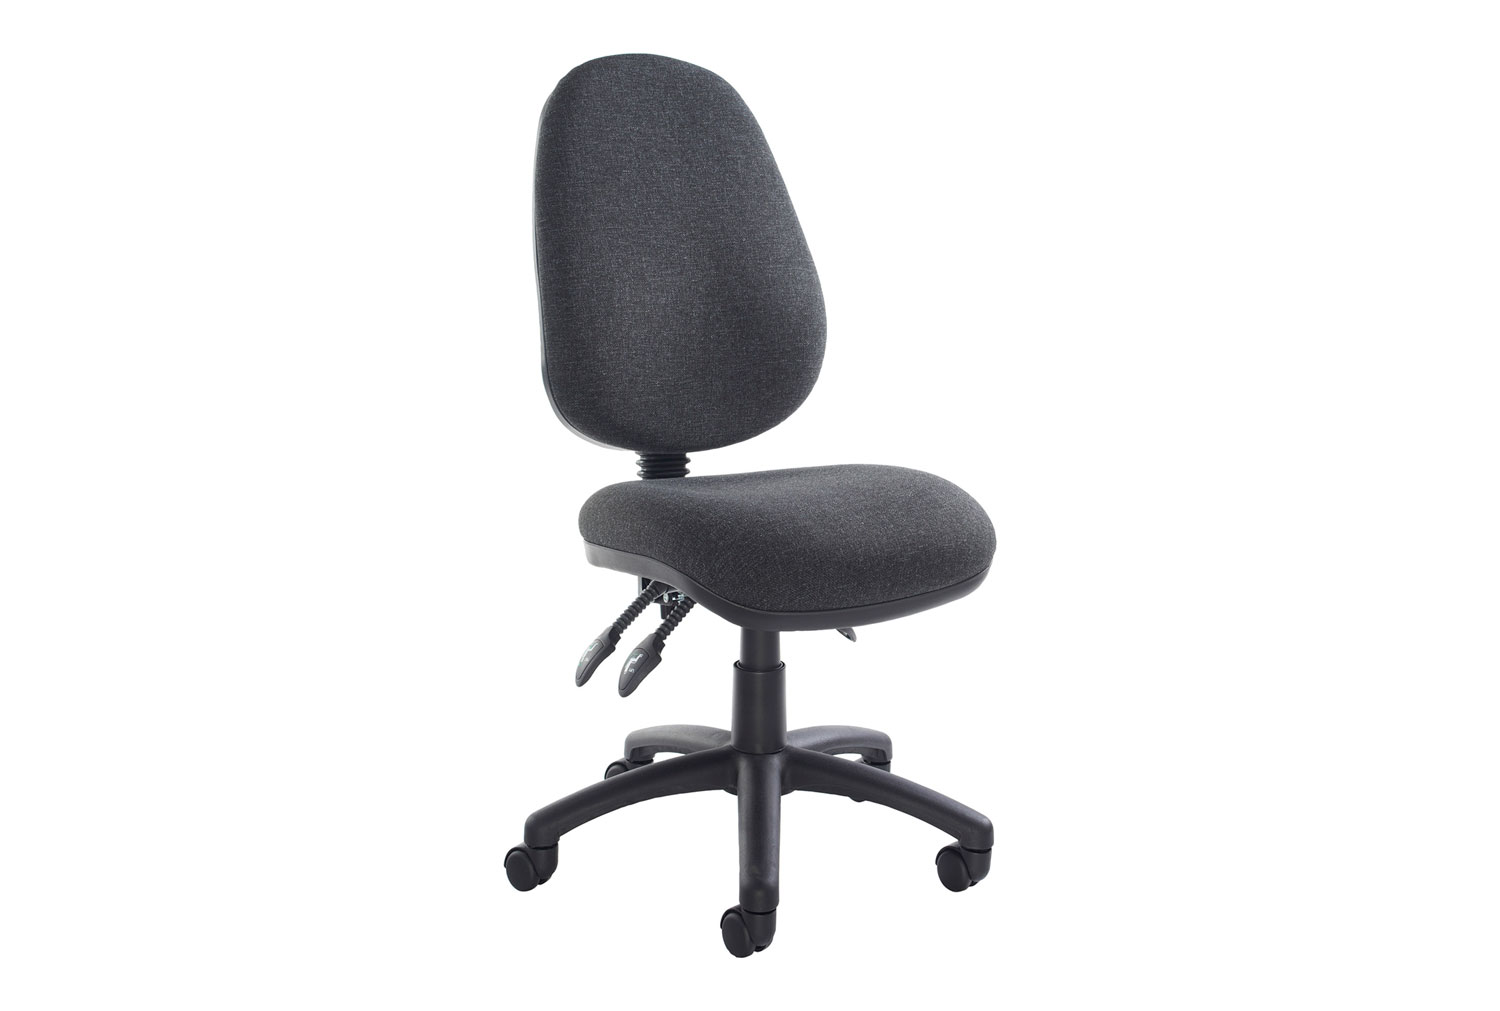 Full Lumbar 3 Lever Operator Office Chair No Arms, Charcoal, Express Delivery